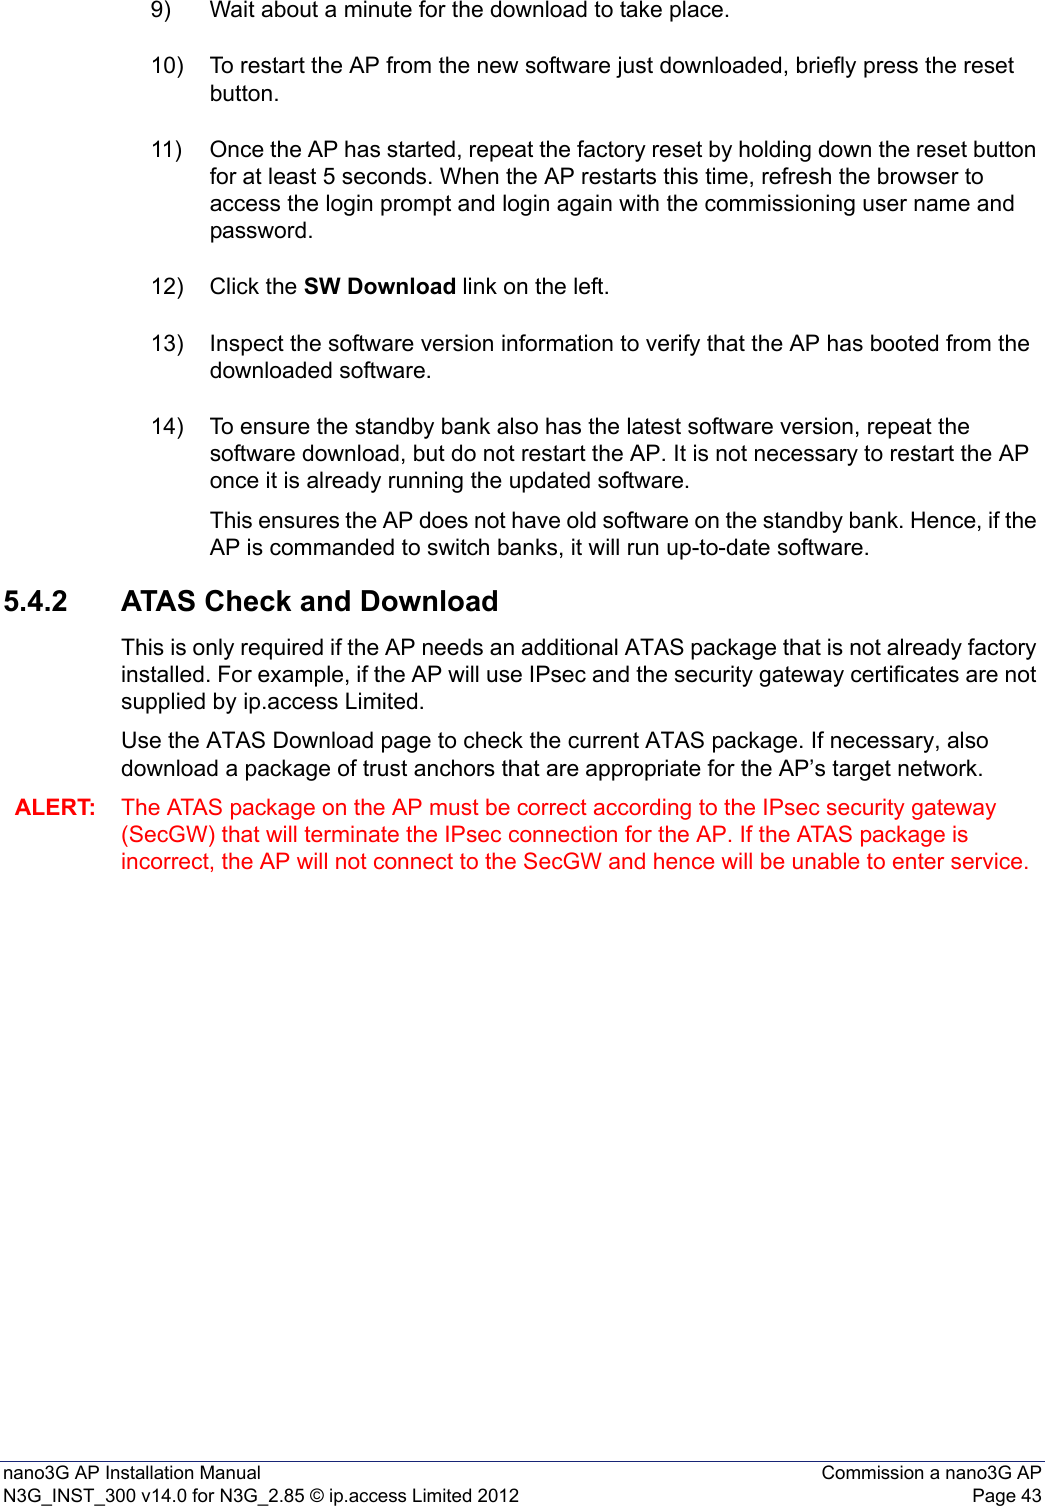 nano3G AP Installation Manual Commission a nano3G APN3G_INST_300 v14.0 for N3G_2.85 © ip.access Limited 2012 Page 439) Wait about a minute for the download to take place.10) To restart the AP from the new software just downloaded, briefly press the reset button. 11) Once the AP has started, repeat the factory reset by holding down the reset button for at least 5 seconds. When the AP restarts this time, refresh the browser to access the login prompt and login again with the commissioning user name and password.12) Click the SW Download link on the left.13) Inspect the software version information to verify that the AP has booted from the downloaded software.14) To ensure the standby bank also has the latest software version, repeat the software download, but do not restart the AP. It is not necessary to restart the AP once it is already running the updated software.This ensures the AP does not have old software on the standby bank. Hence, if the AP is commanded to switch banks, it will run up-to-date software.5.4.2 ATAS Check and DownloadThis is only required if the AP needs an additional ATAS package that is not already factory installed. For example, if the AP will use IPsec and the security gateway certificates are not supplied by ip.access Limited.Use the ATAS Download page to check the current ATAS package. If necessary, also download a package of trust anchors that are appropriate for the AP’s target network.ALERT: The ATAS package on the AP must be correct according to the IPsec security gateway (SecGW) that will terminate the IPsec connection for the AP. If the ATAS package is incorrect, the AP will not connect to the SecGW and hence will be unable to enter service. 